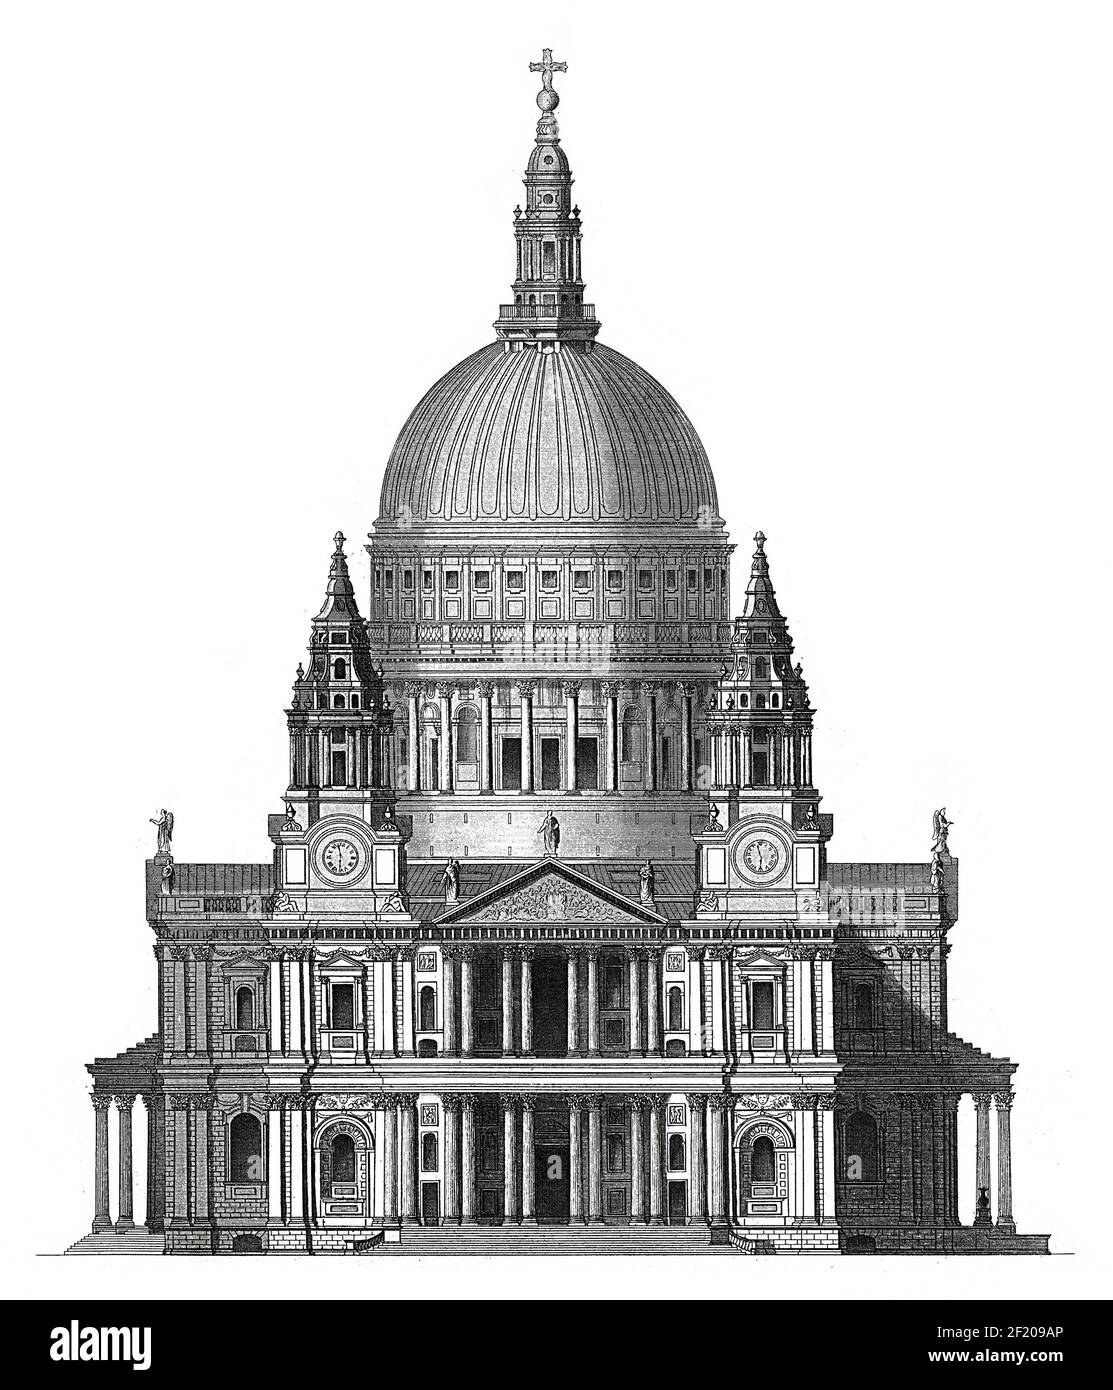 19th-century engraving of St Paul's Cathedral in London, England. Published in Systematischer Bilder-Atlas zum Conversations-Lexikon, Ikonographische Stock Photo